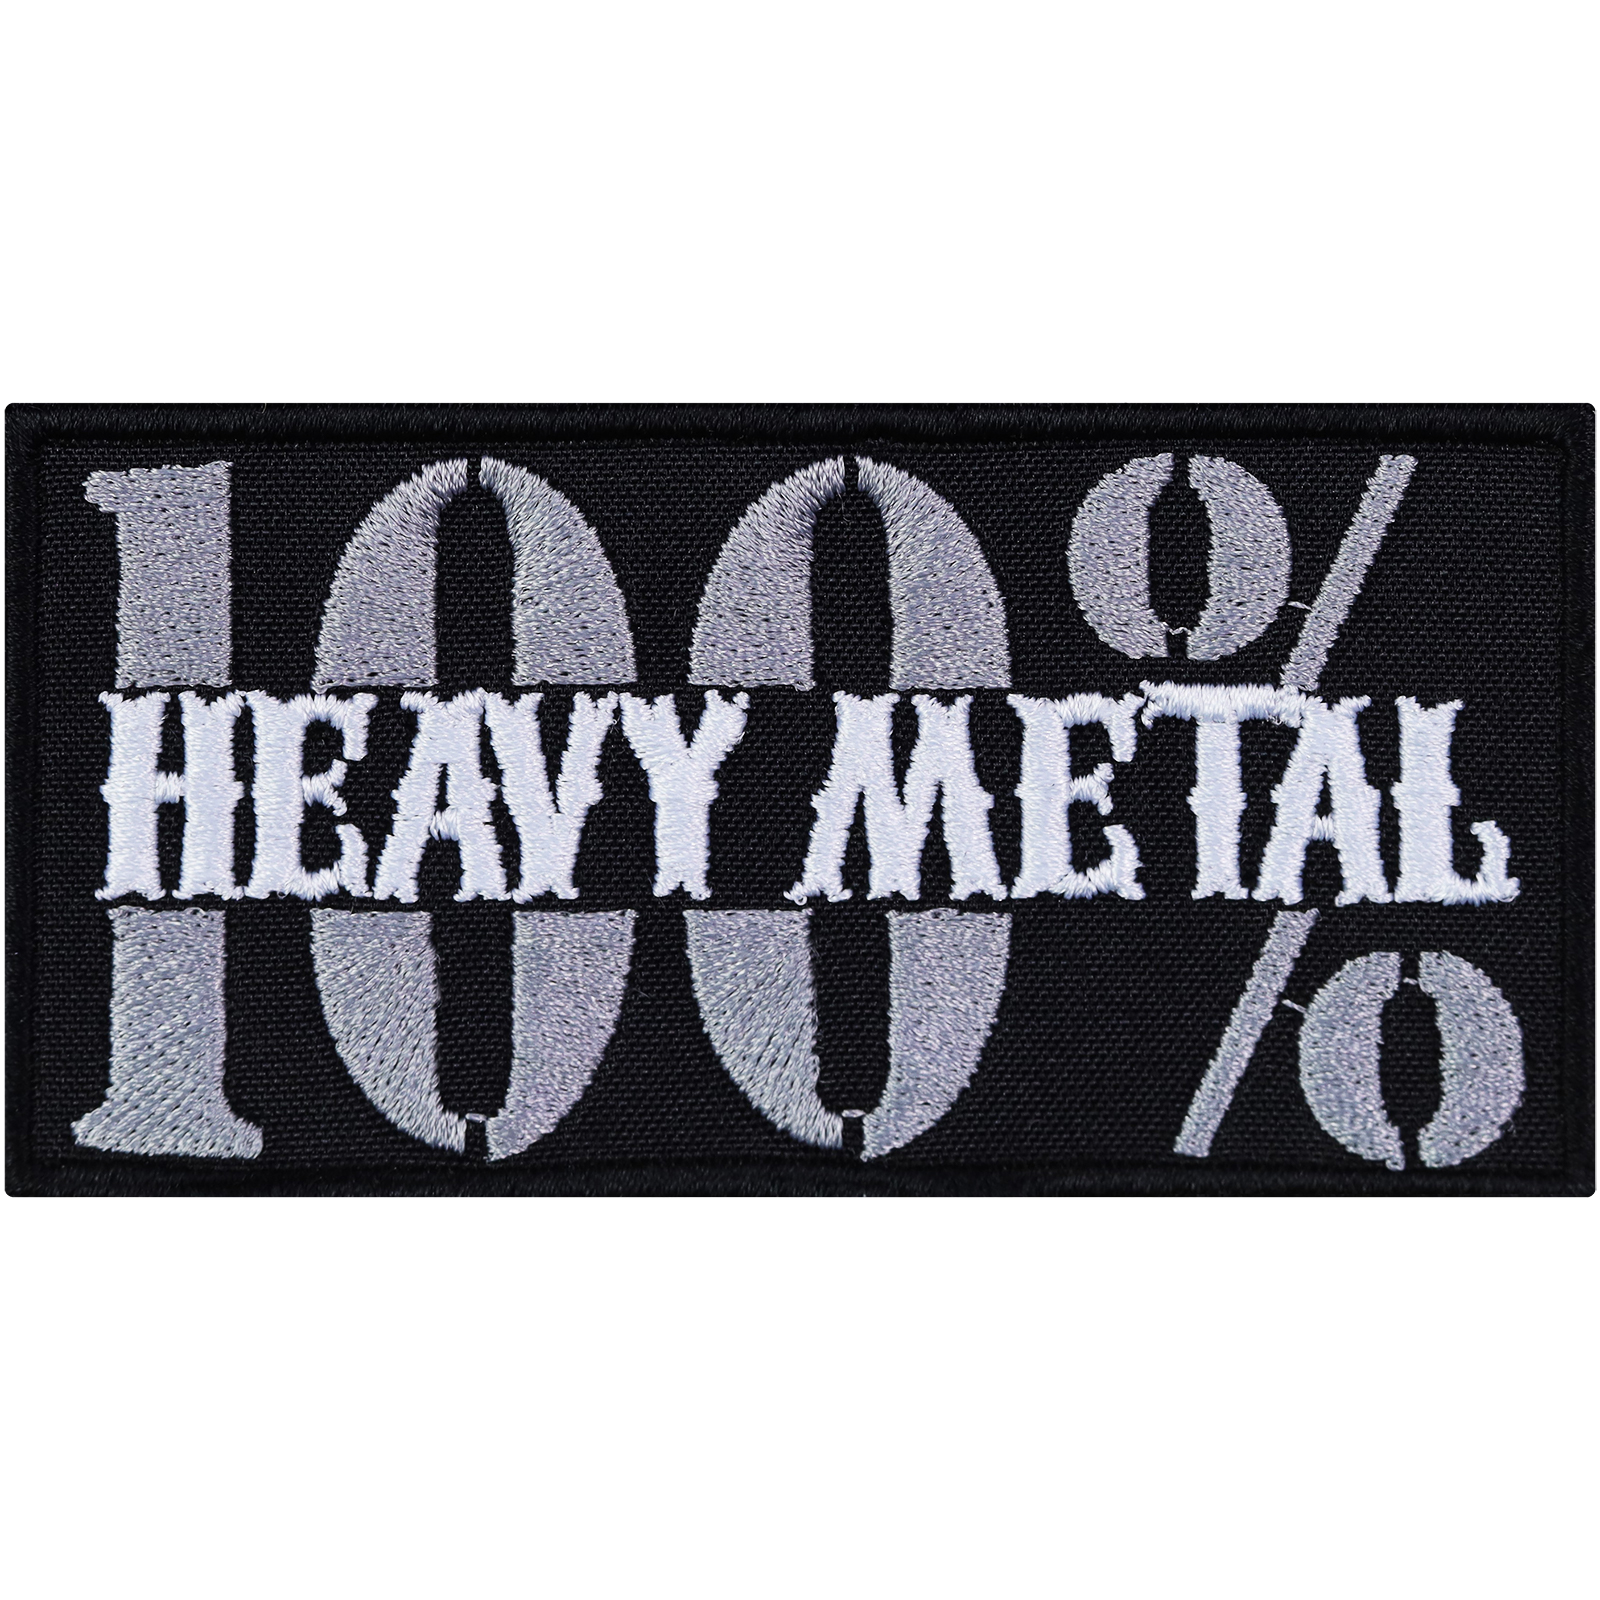 100% Heavy Metal - Patch